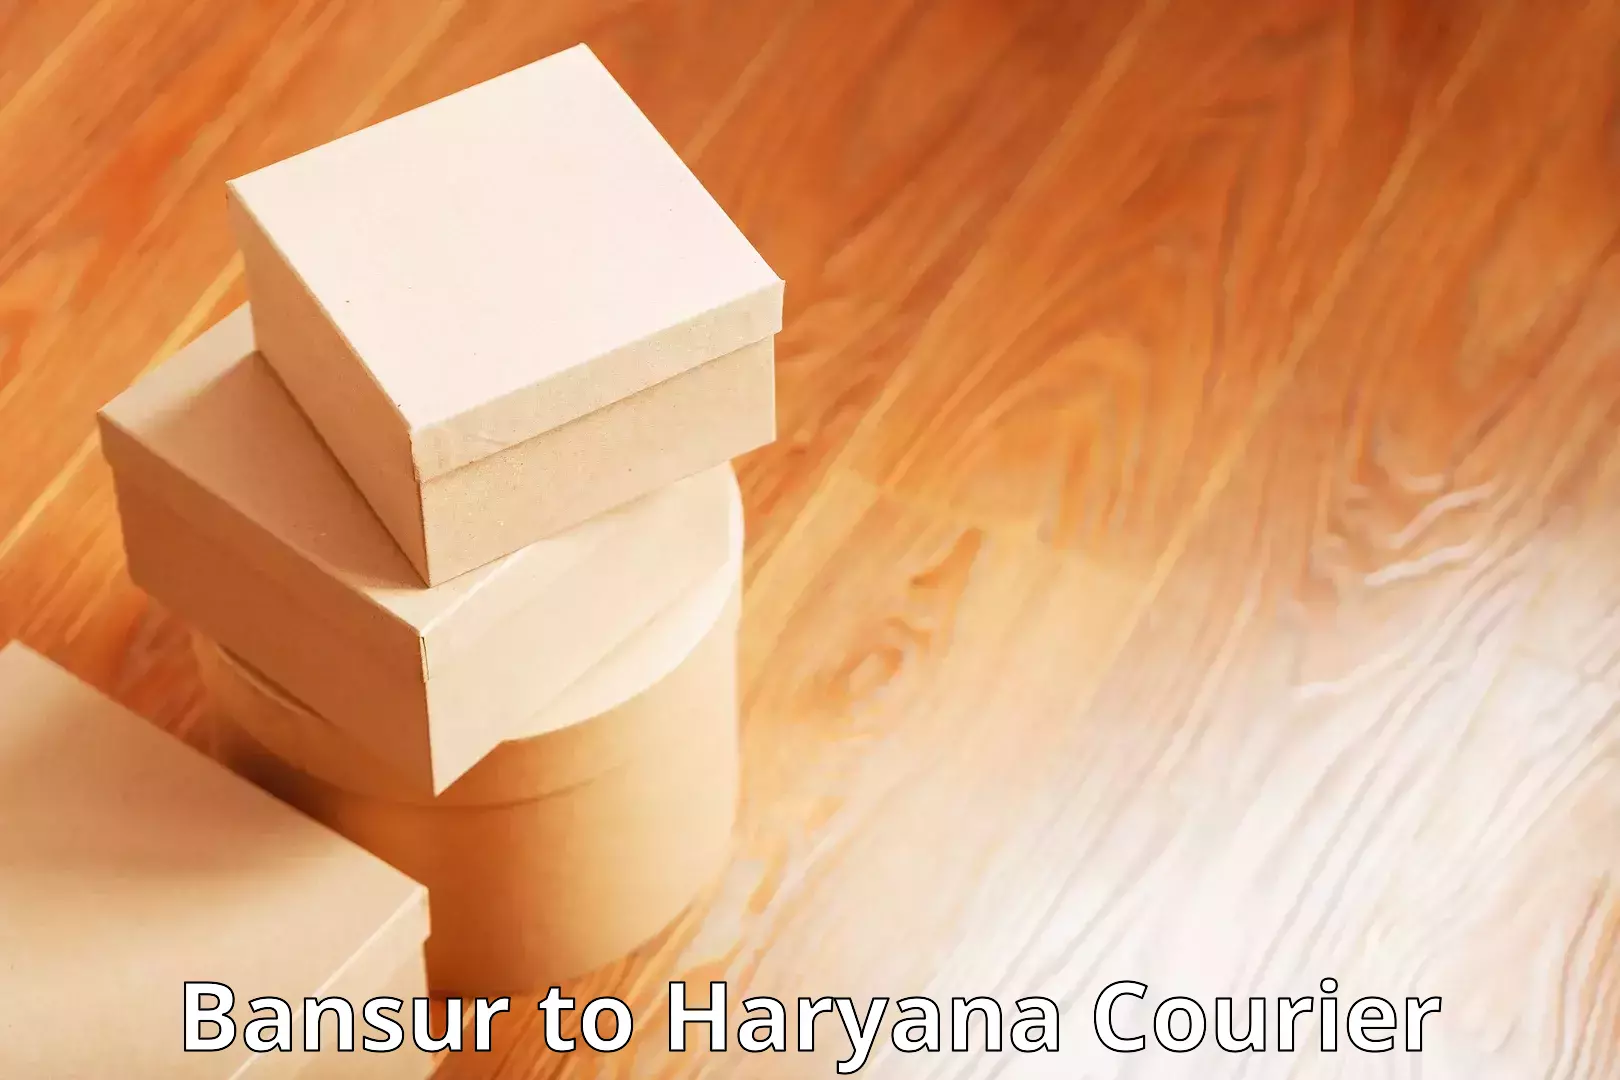 Package delivery network Bansur to Haryana